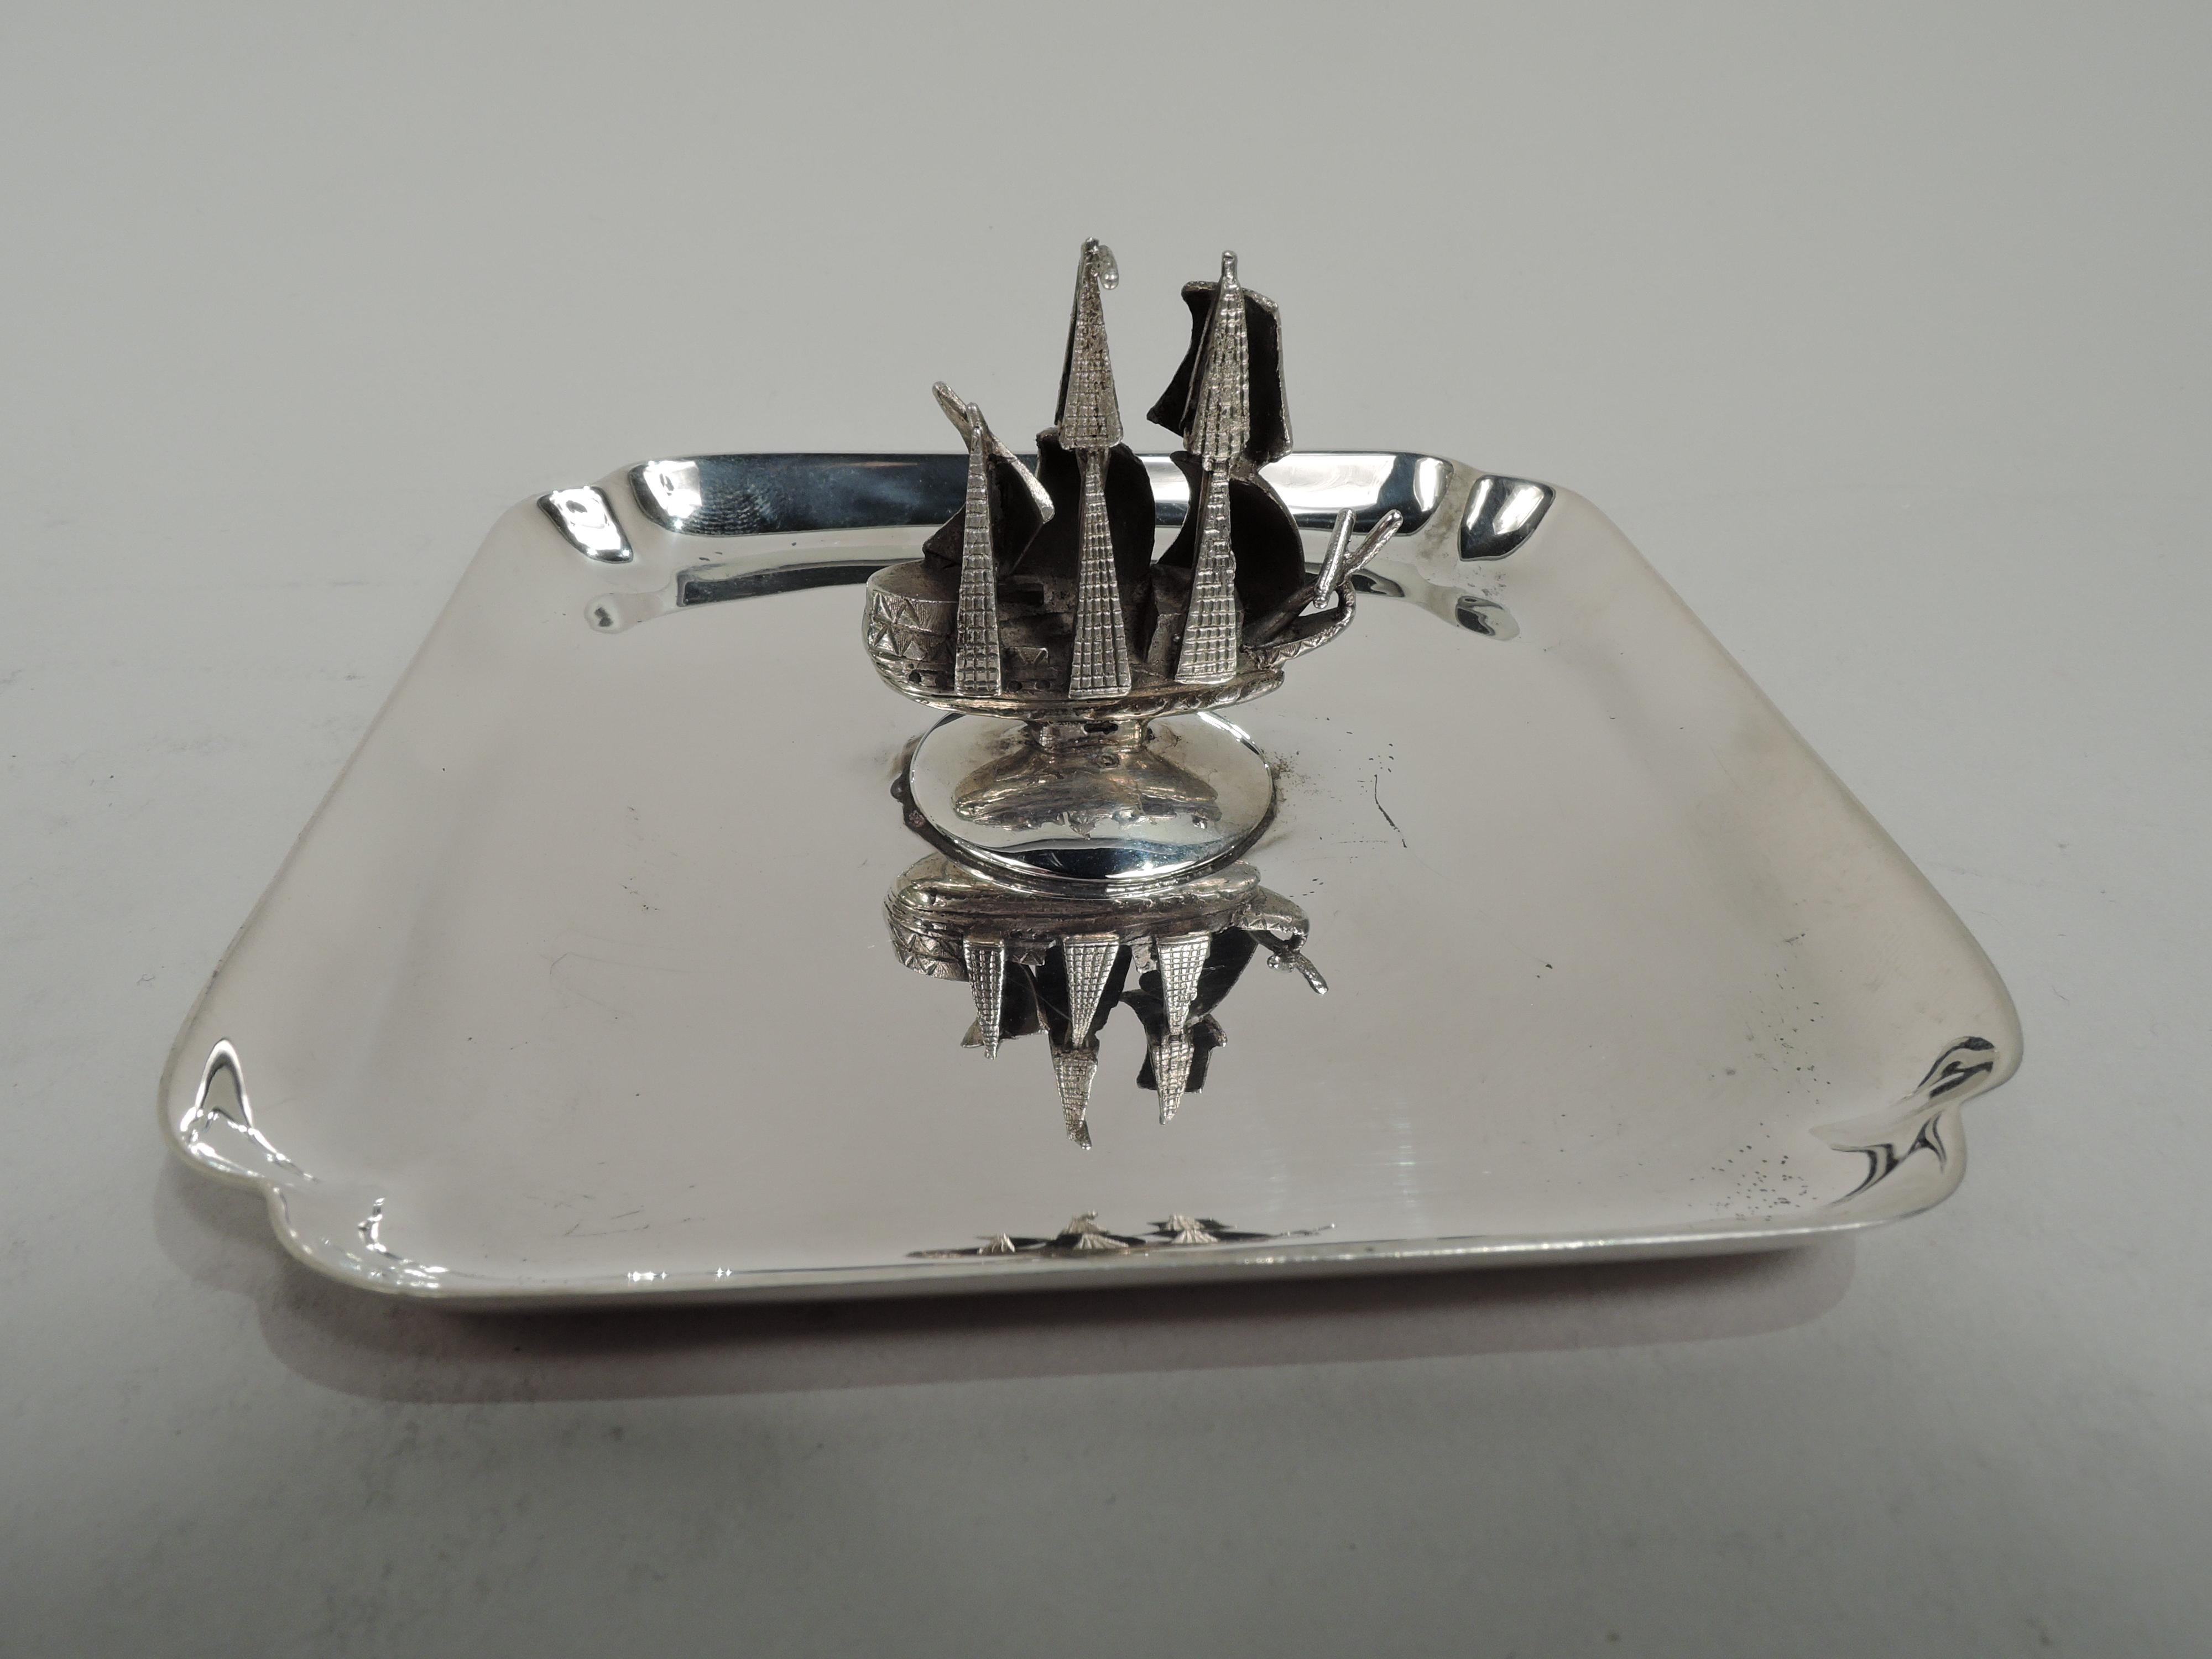 American sterling silver vide-poche, ca 1920. Square with lobed corners. Mounted to center is 3-mast galleon with billowing sales and delineated wood hull. Marked “Sterling / 5”. Weight: 3 troy ounces.